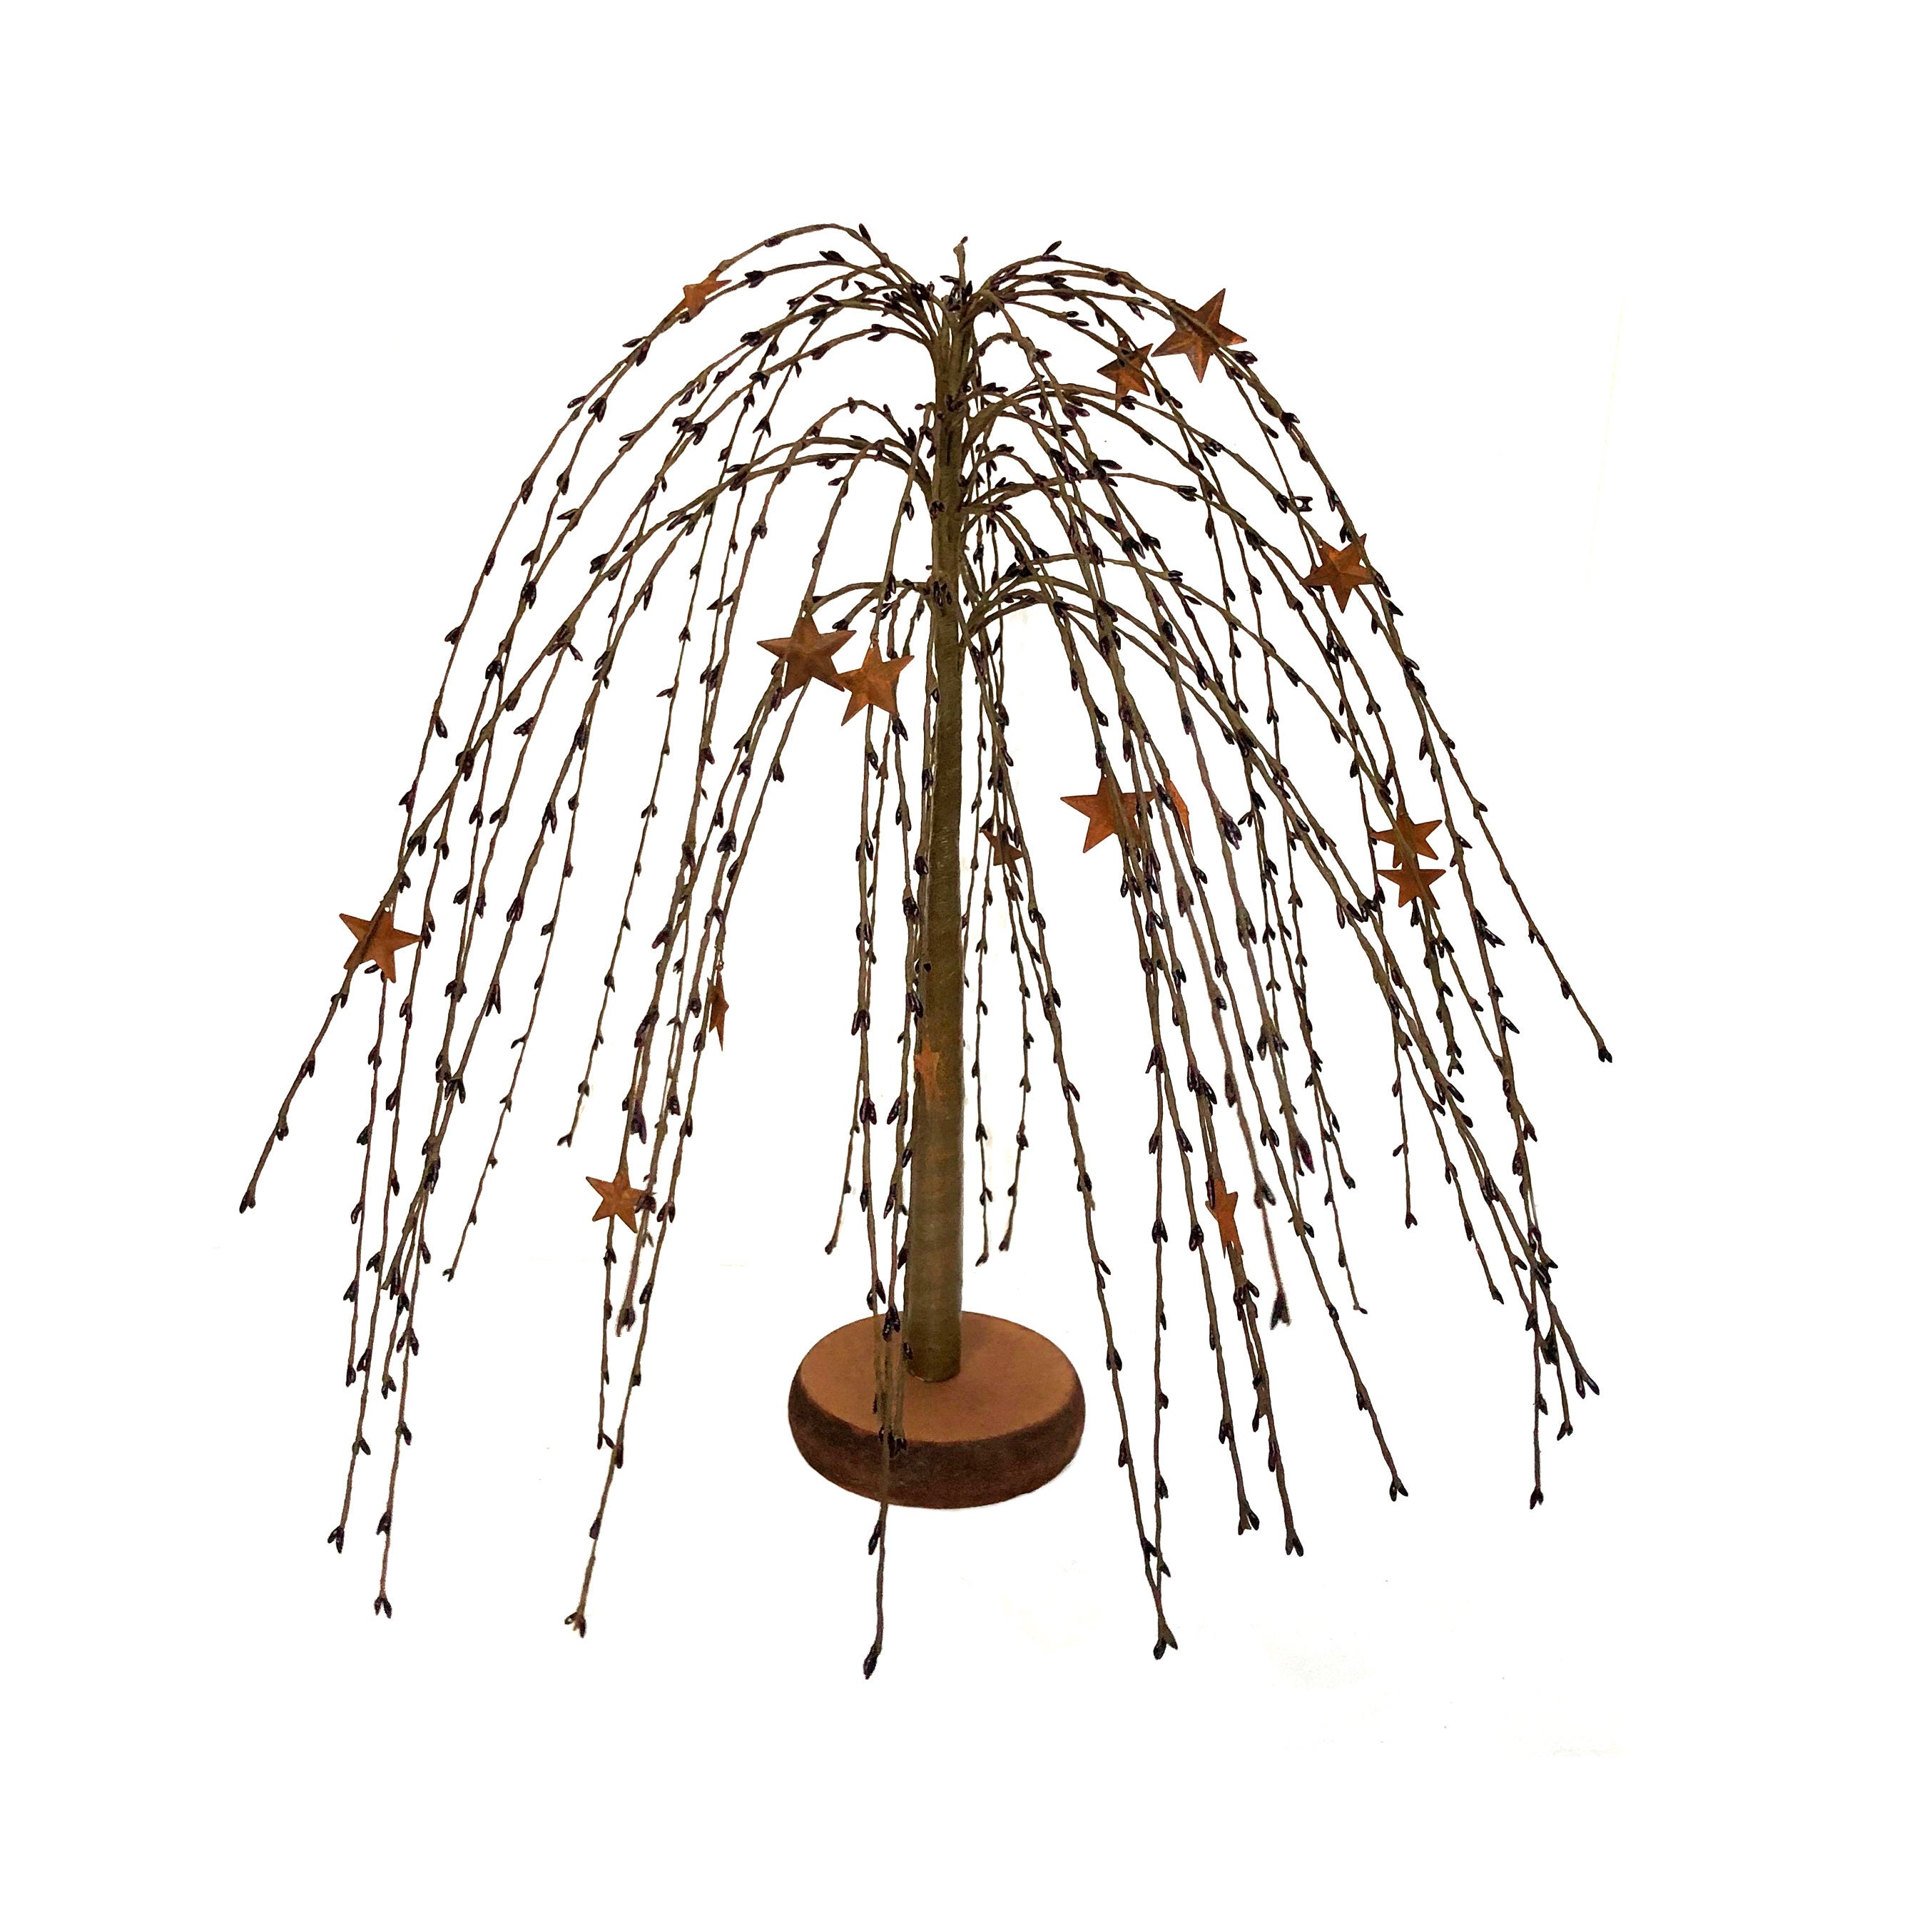 Weeping willow tree, country, primitive, folk art, unknown maker,B28